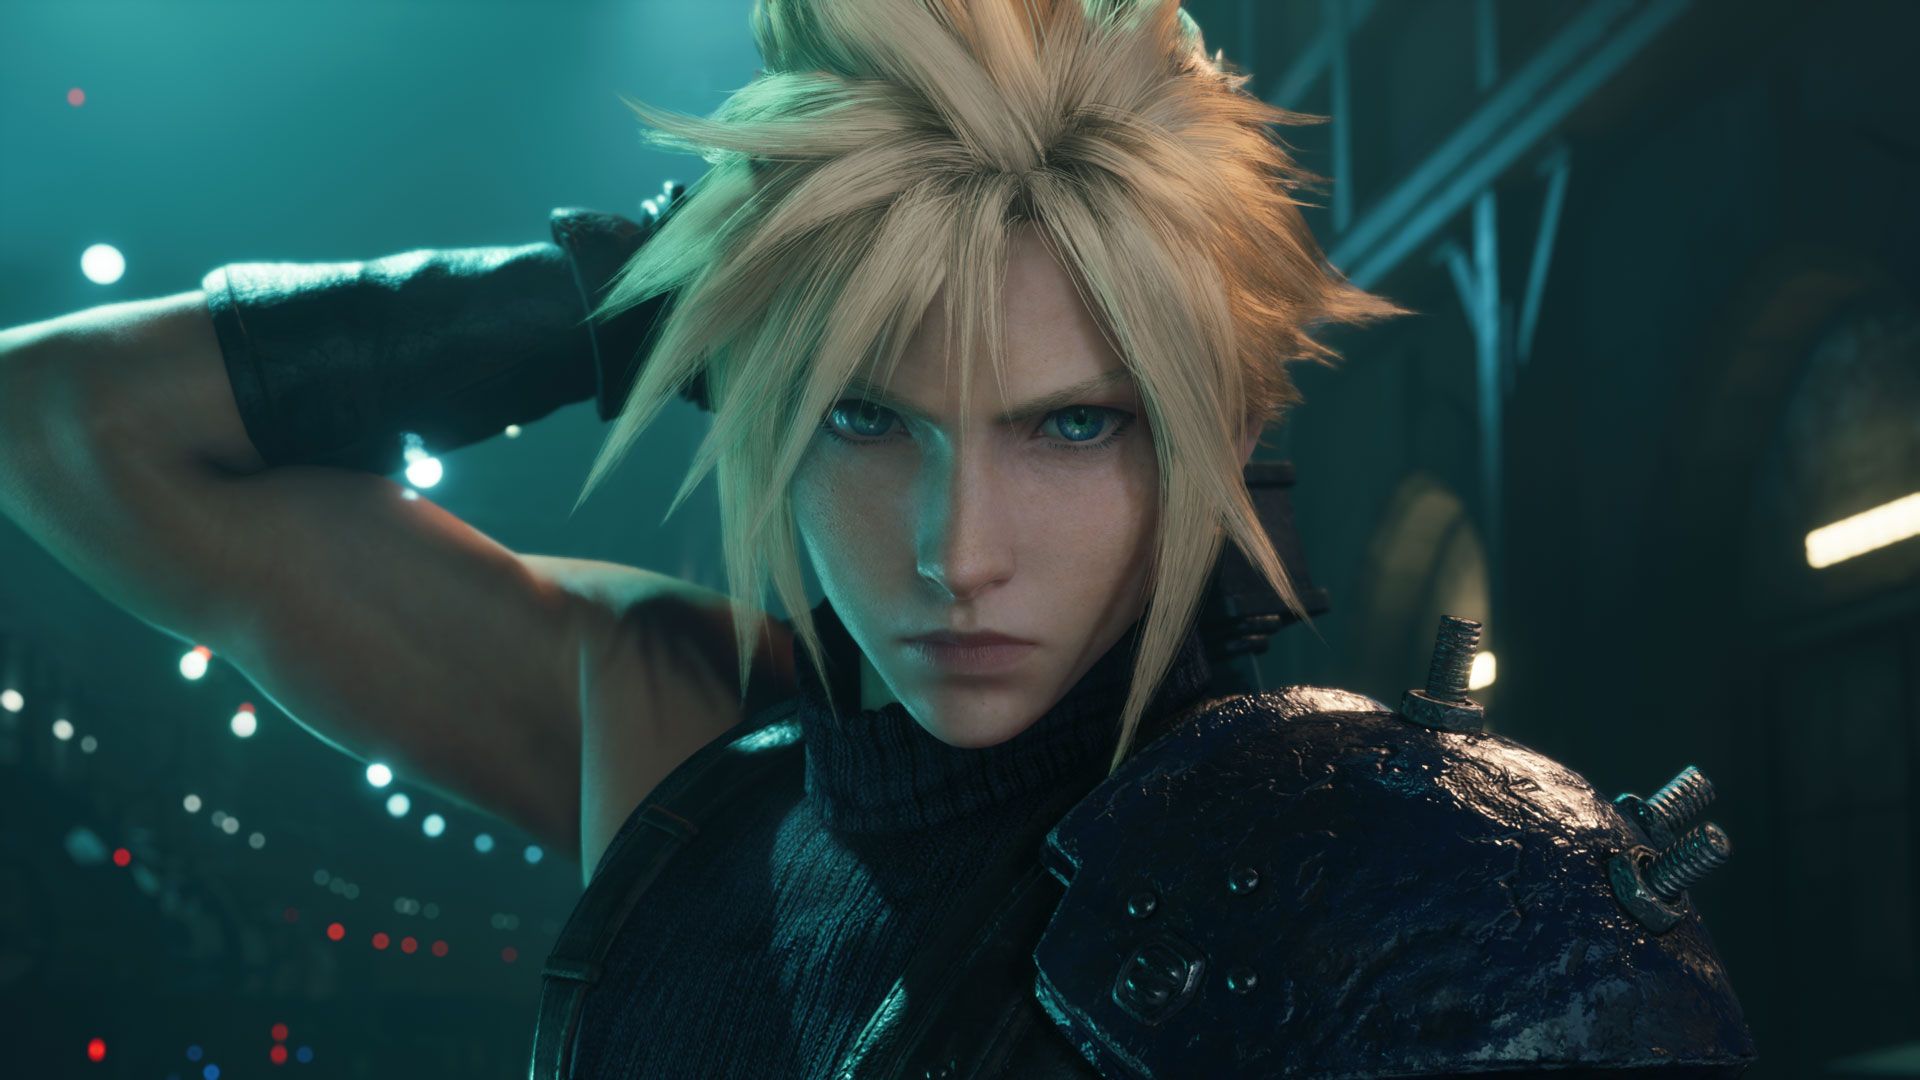 Final Fantasy VII Remake unofficially comes to VR with this PC mod